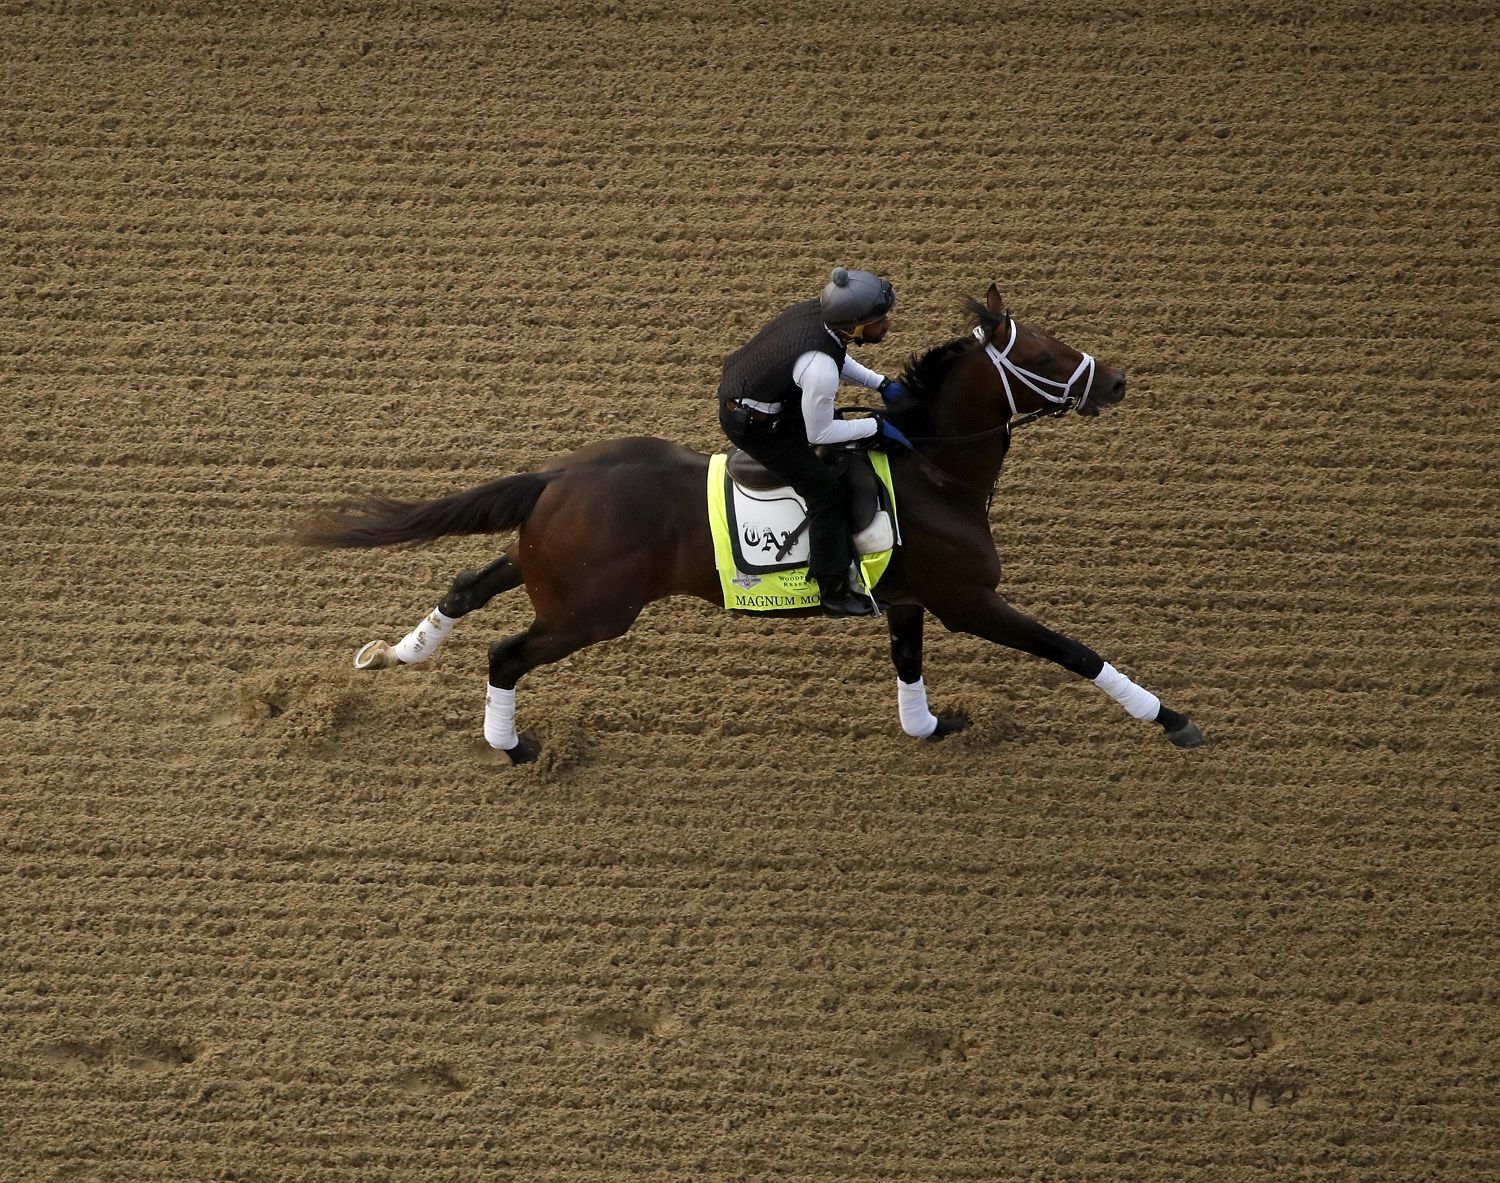 Kentucky Derby entrant Magnum Moon runs during a morning workout at Churchill Downs Wednesday, May 2, 2018, in Louisville, Ky. The 144th running of the Kentucky Derby is scheduled for Saturday, May 5. (AP Photo/Charlie Riedel)